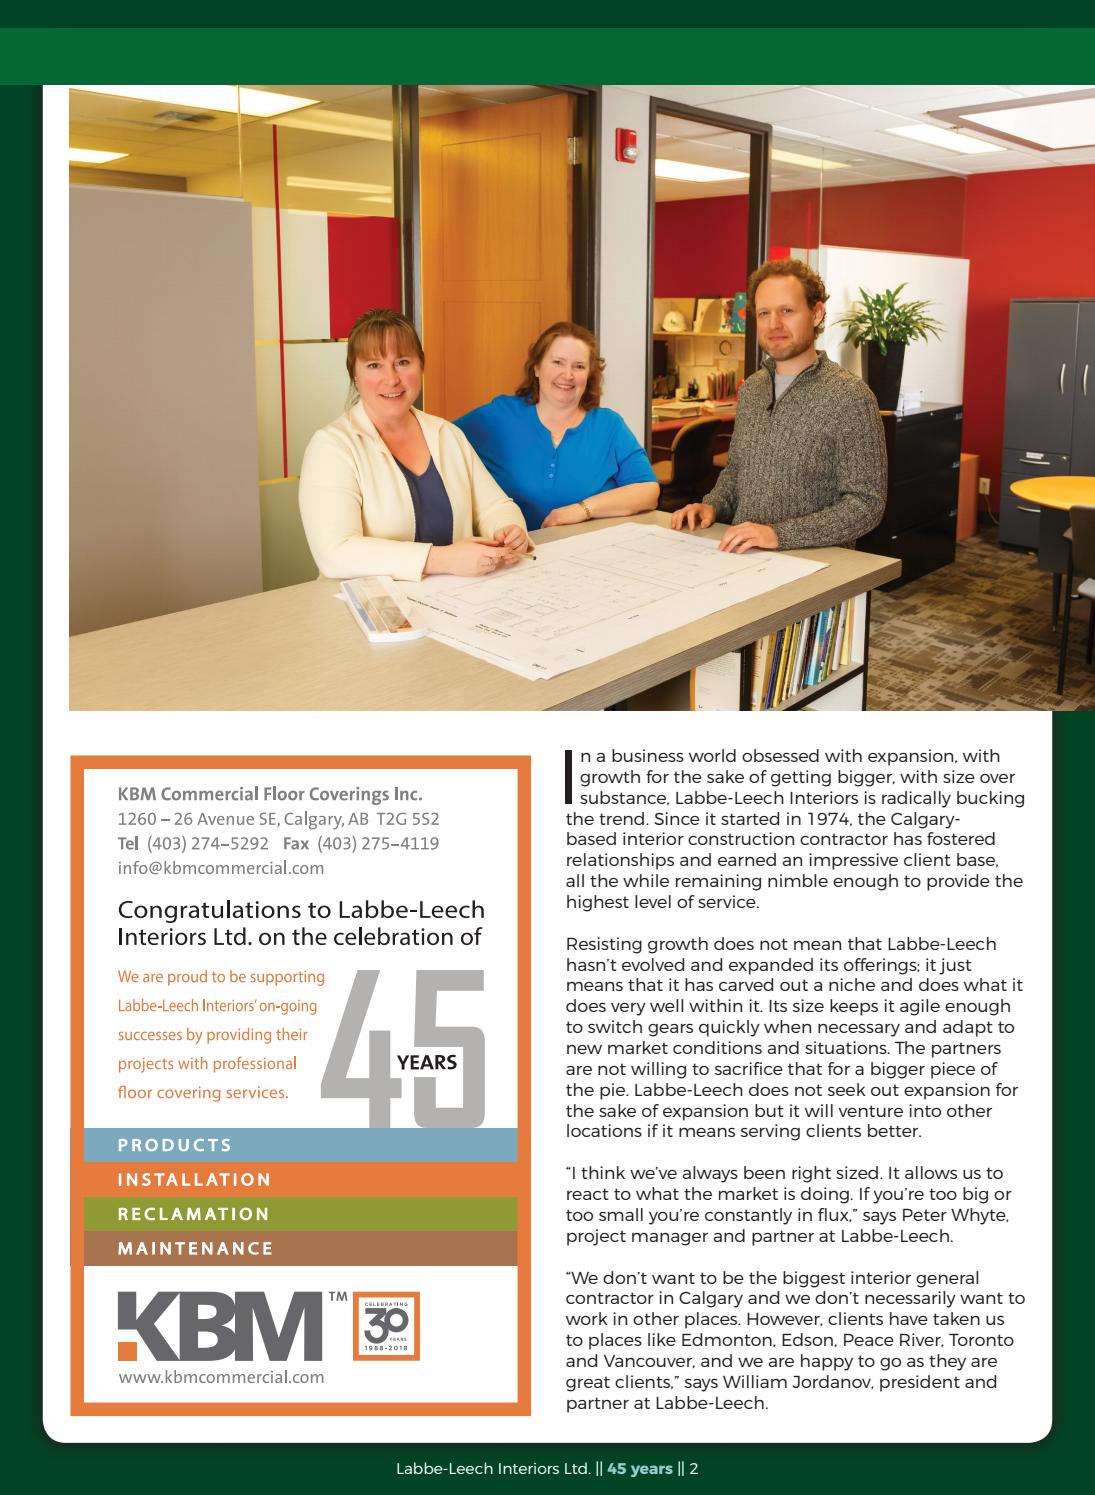 Business in Calgary Magazine - Business Profile for Labbe-Leech Interiors